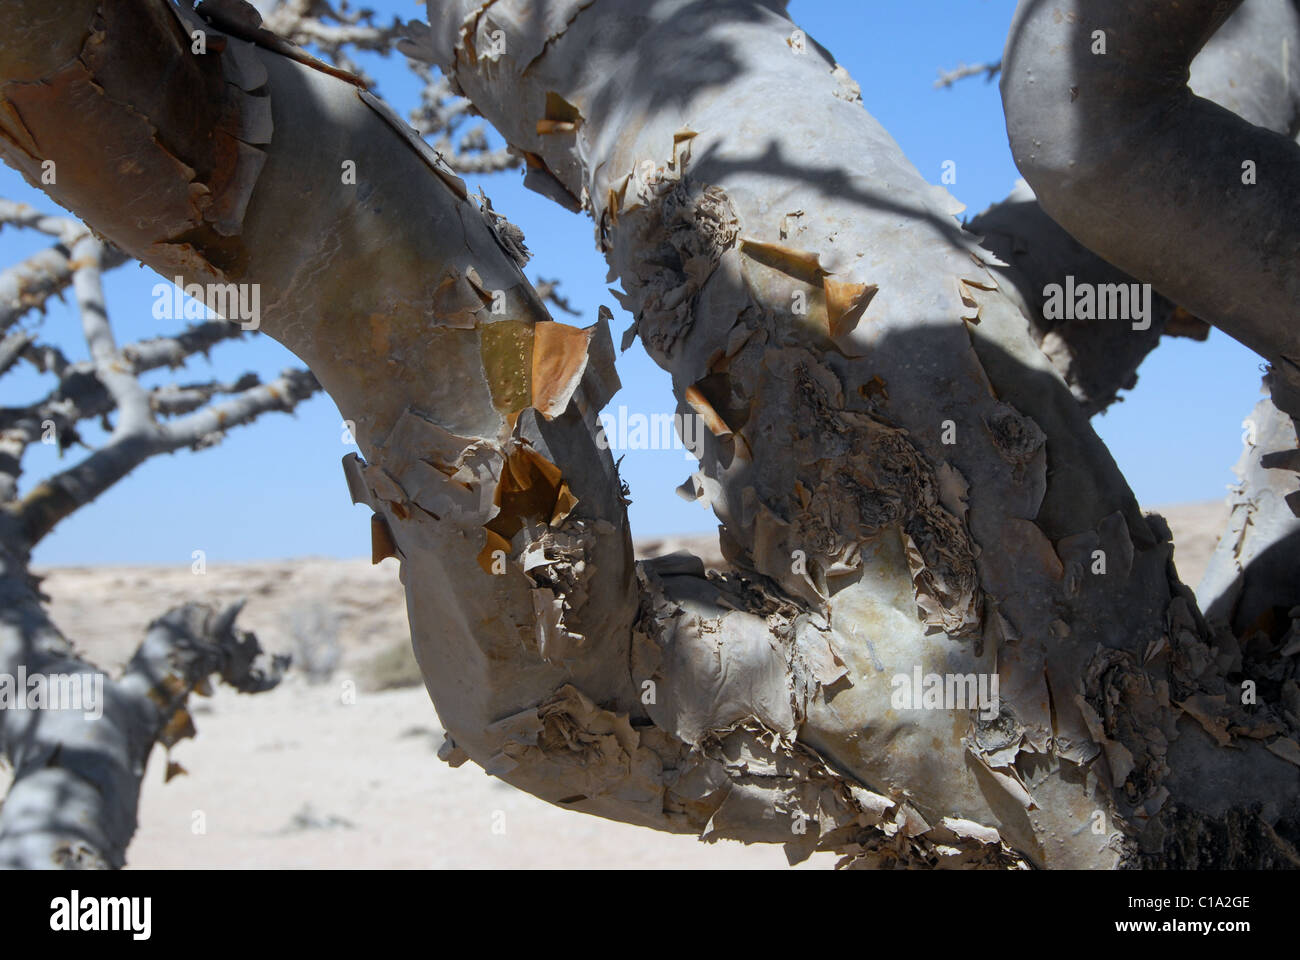 Detail of scratches on Frankincense Tree in Dhofar Province, southern Oman, showing Frankincense oozing from the damaged bark Stock Photo